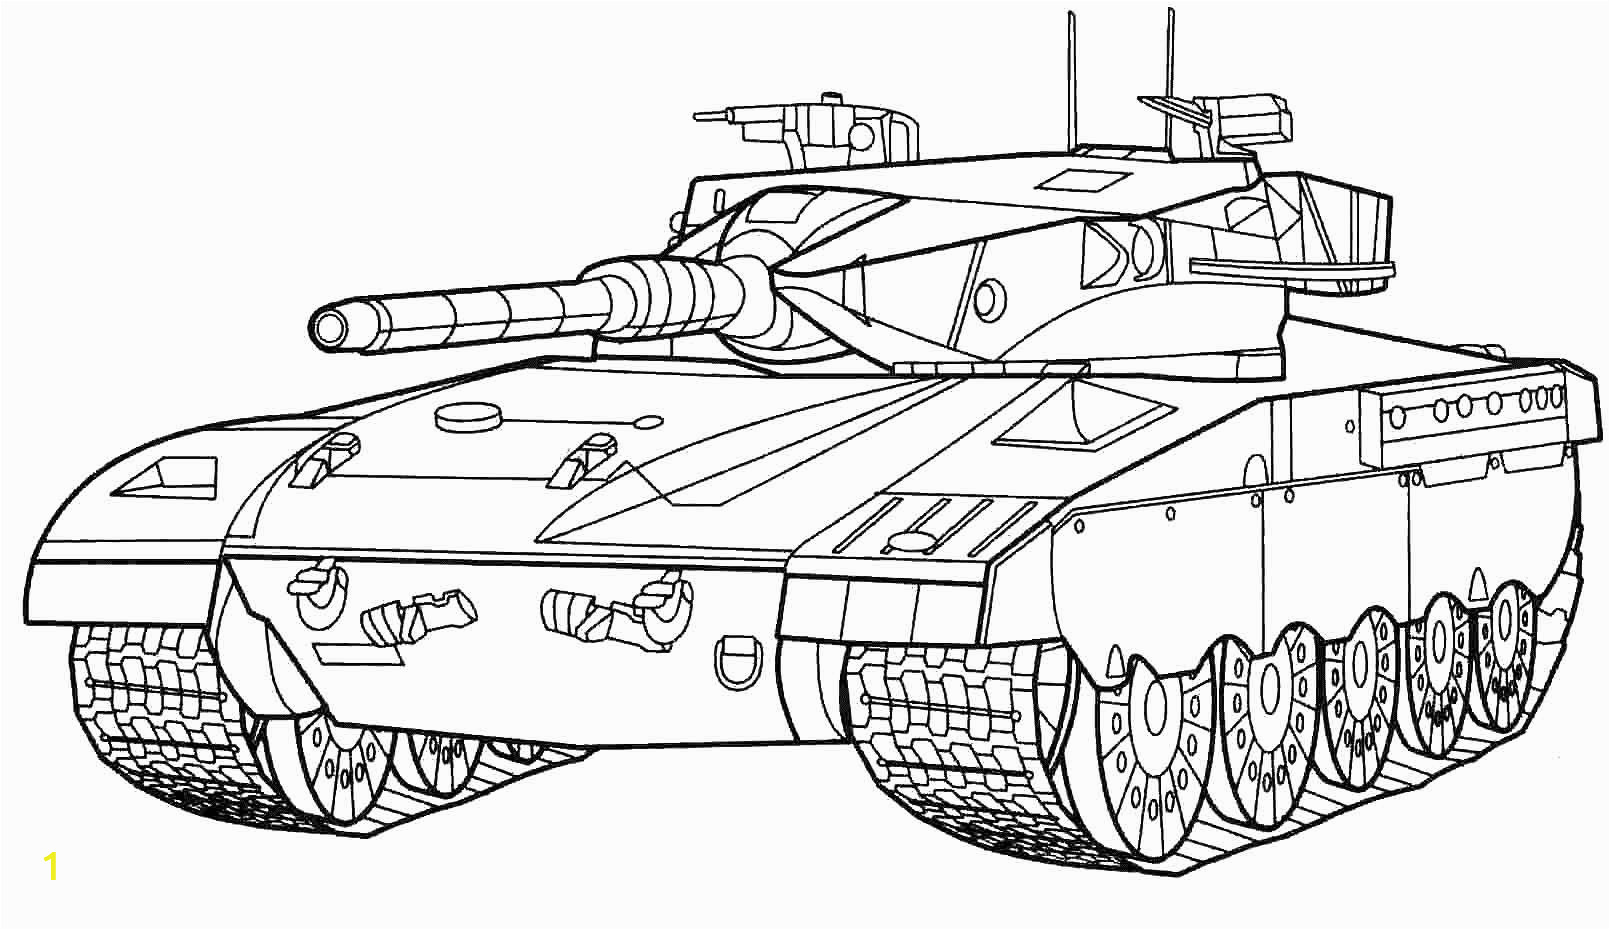 printable tank coloring sheet army military armode image to print for kids